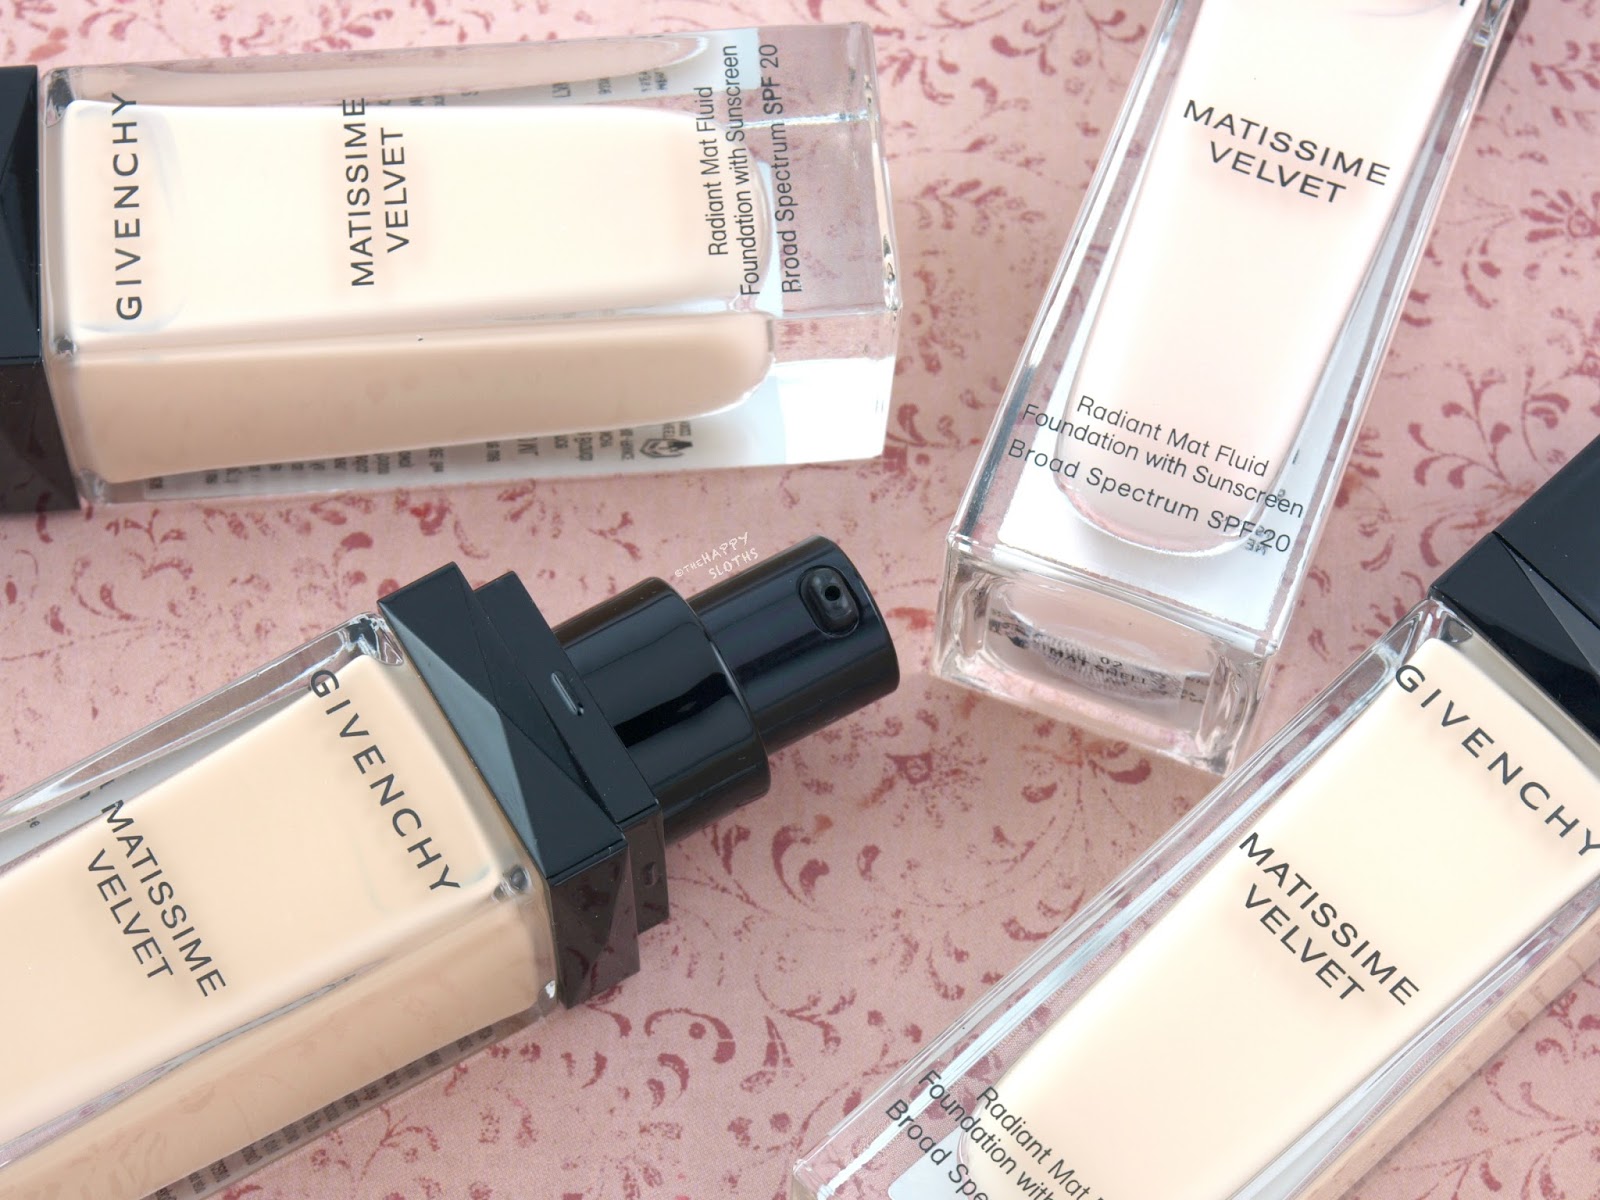 Givenchy Matissime Velvet Radiant Mat Fluid Foundation: Review and Swatches